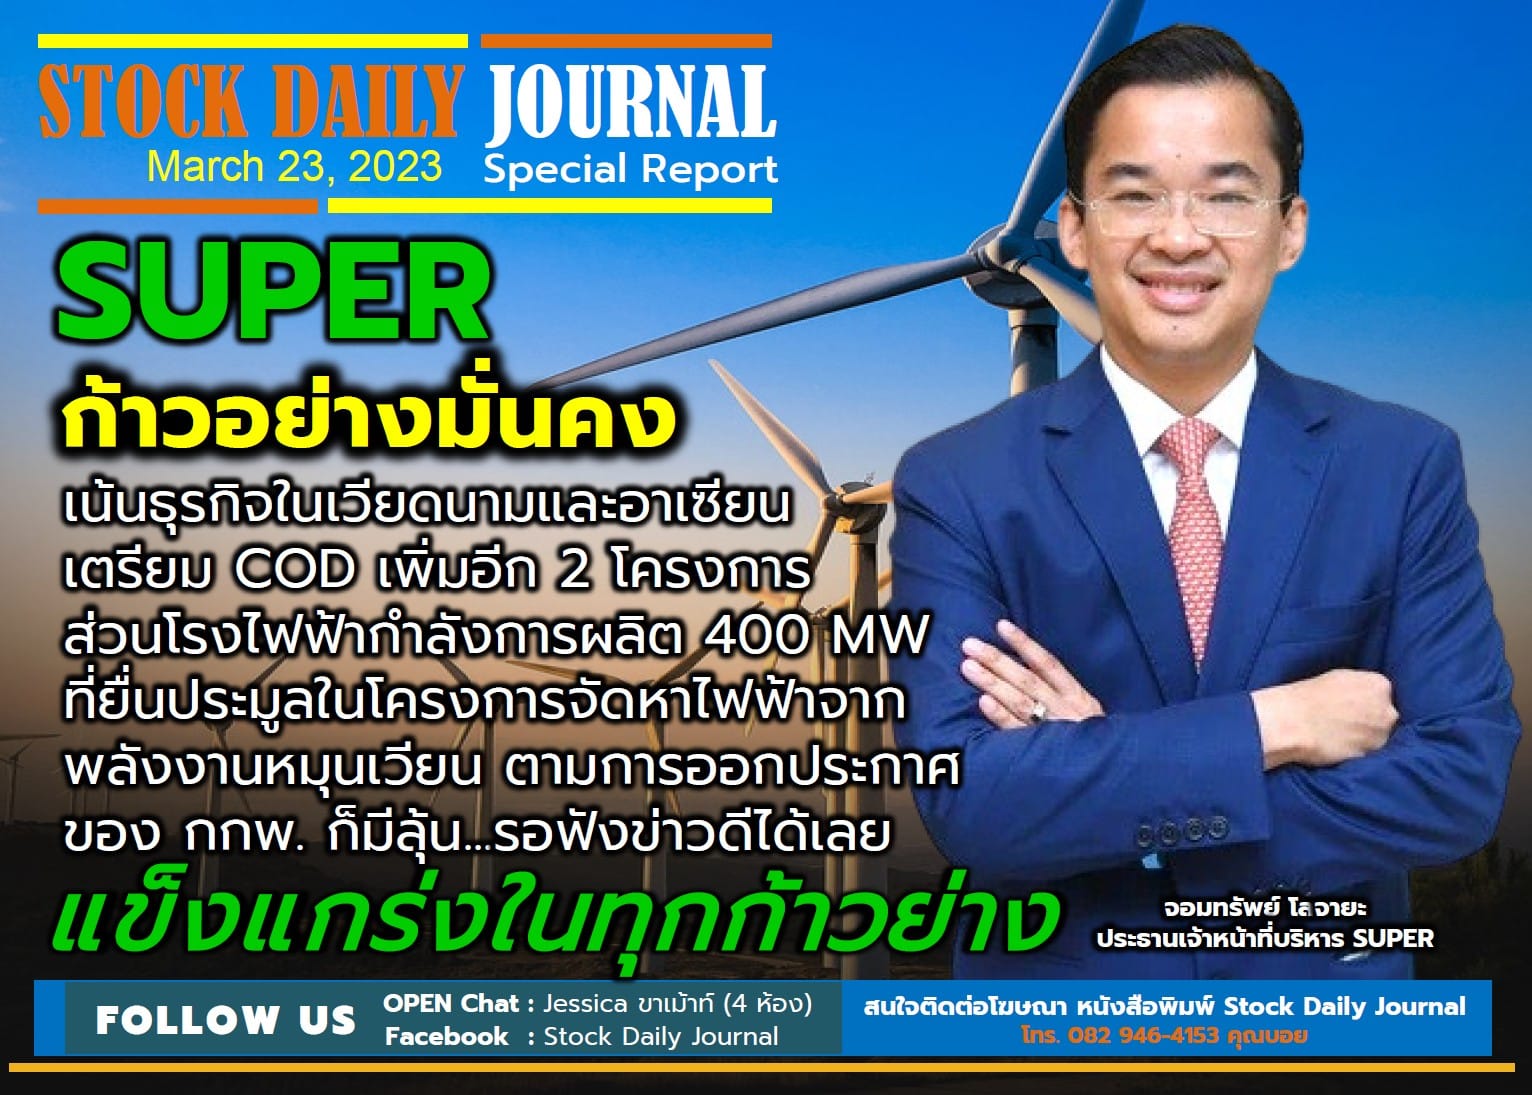 STOCK DAILY JOURNAL “Special Report : SUPER”